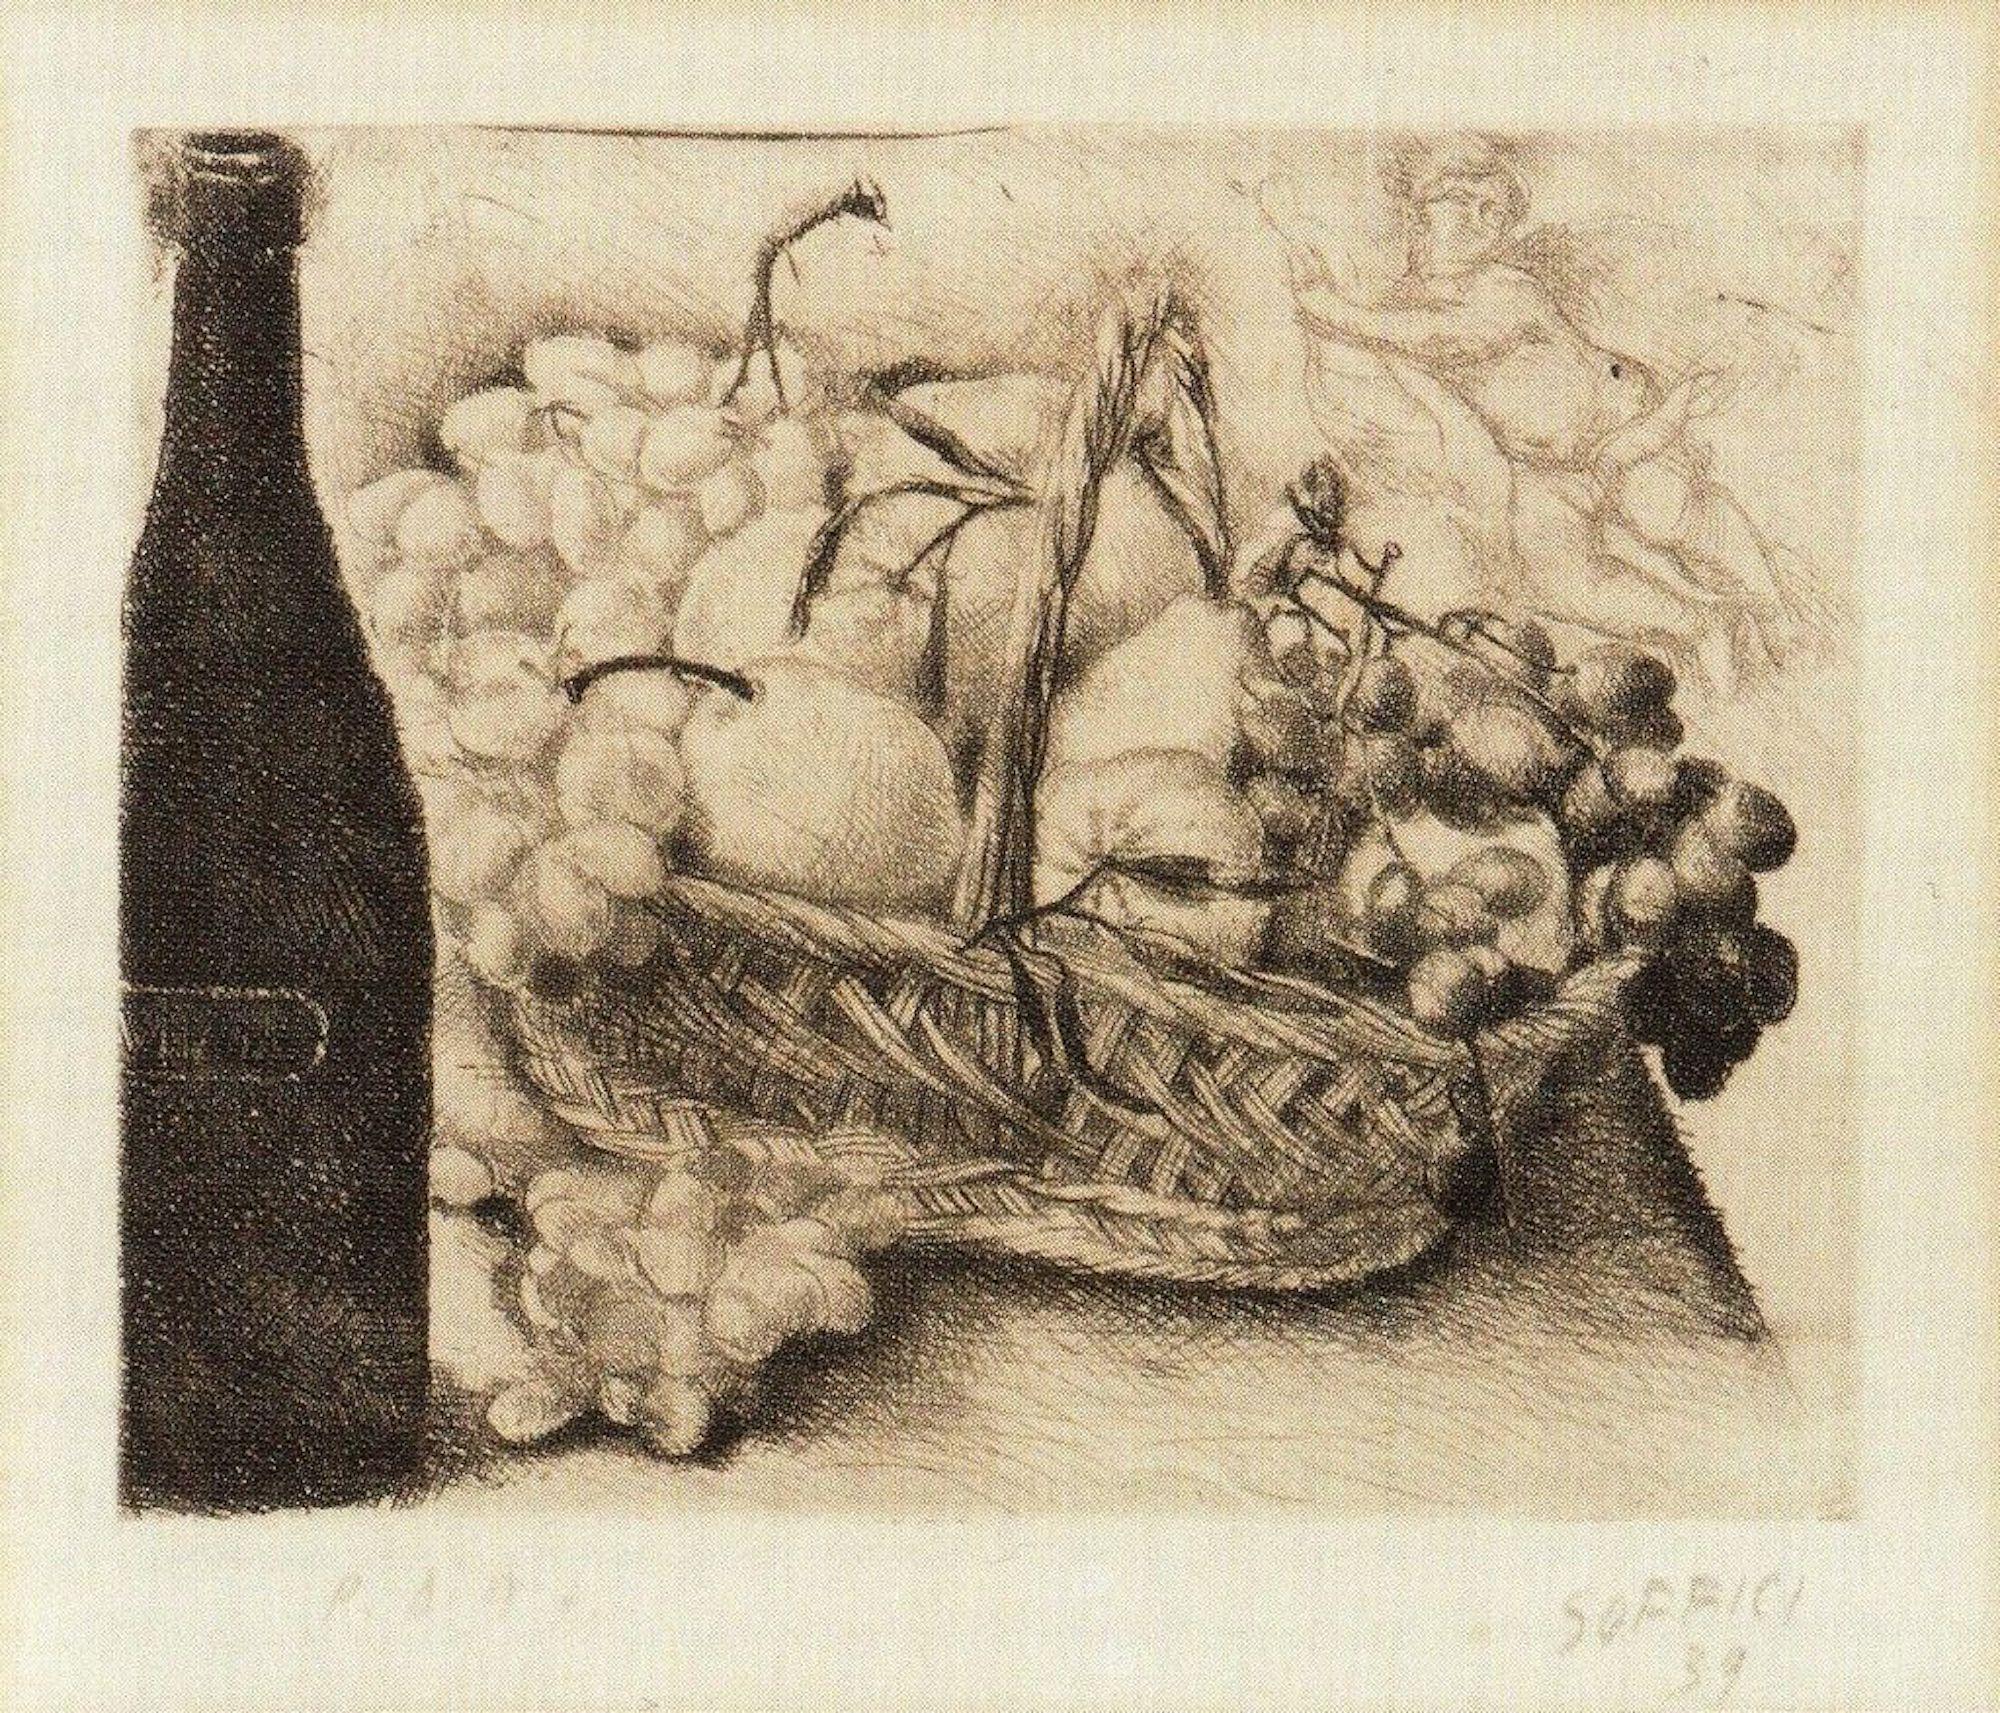 Ardengo Soffici Still-Life Print - Untitled, Still Life - Original Etching and Drypoint by A. Soffici - 1939